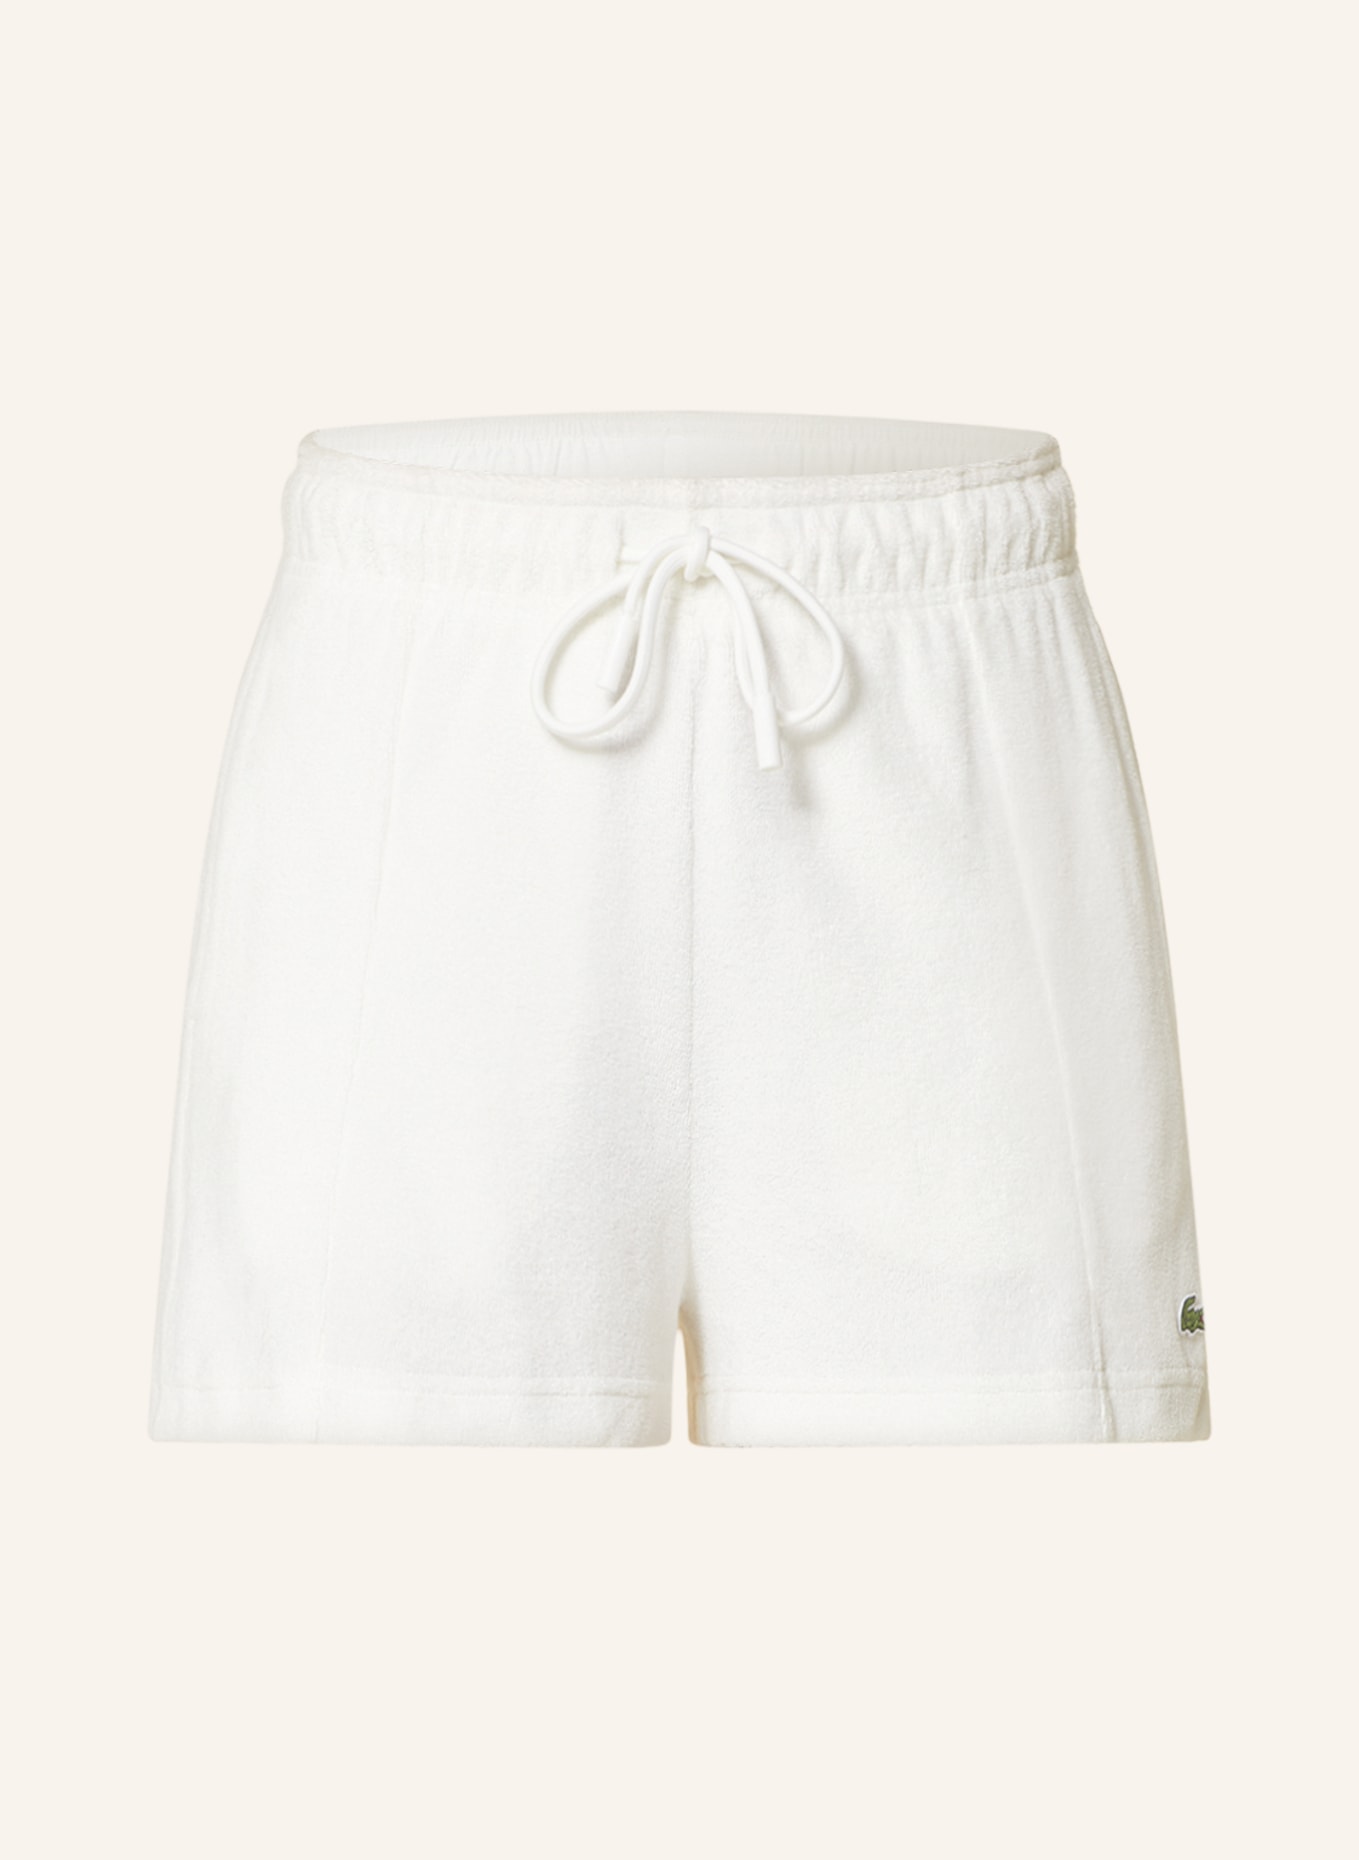 LACOSTE Frotteeshorts, Farbe: WEISS (Bild 1)